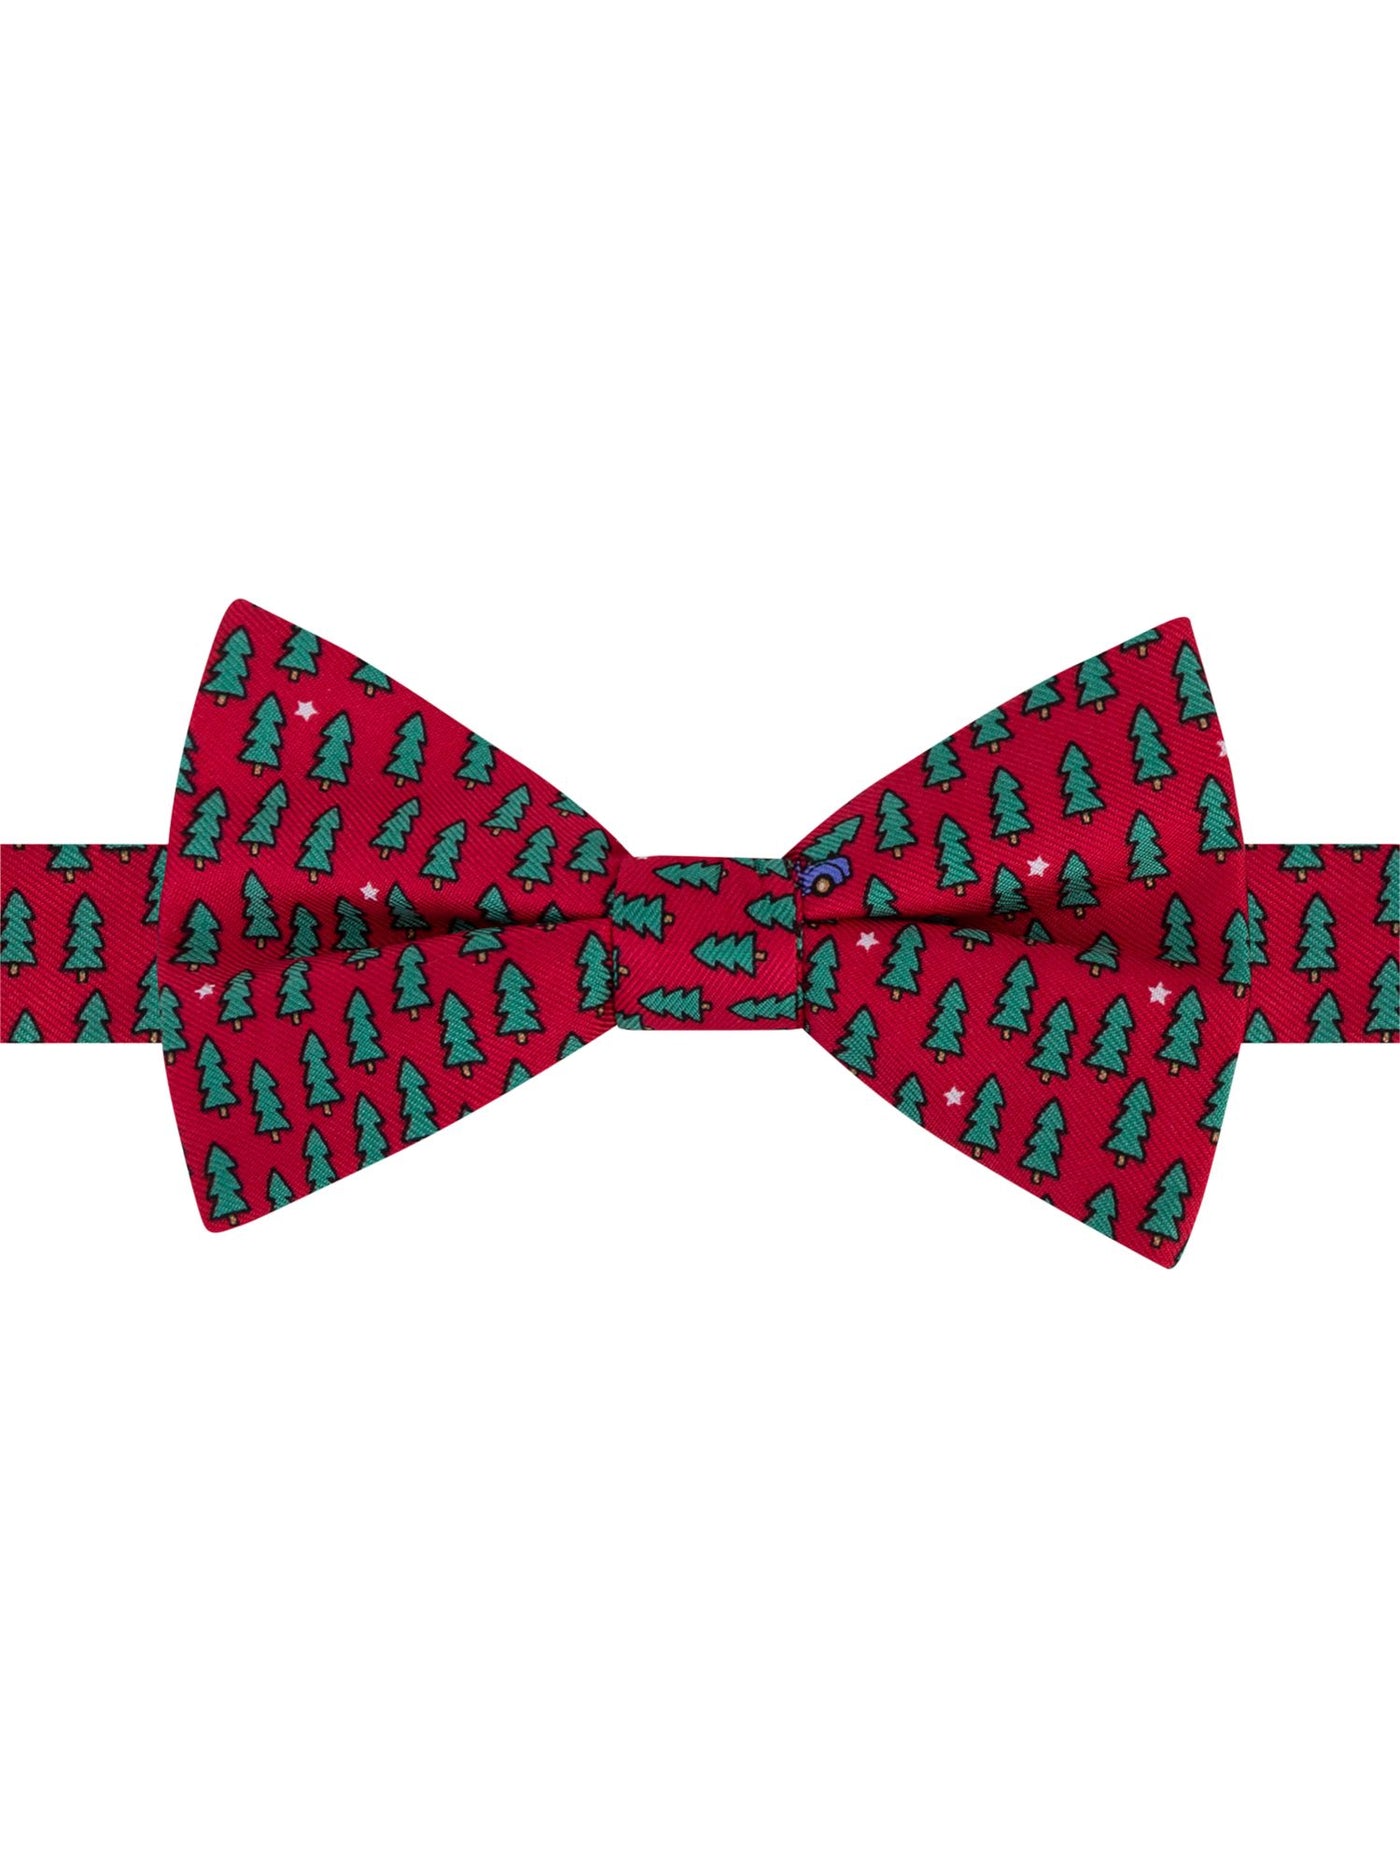 TOMMY HILFIGER Mens Red Novelty Print Christmas Silk Bow Tie